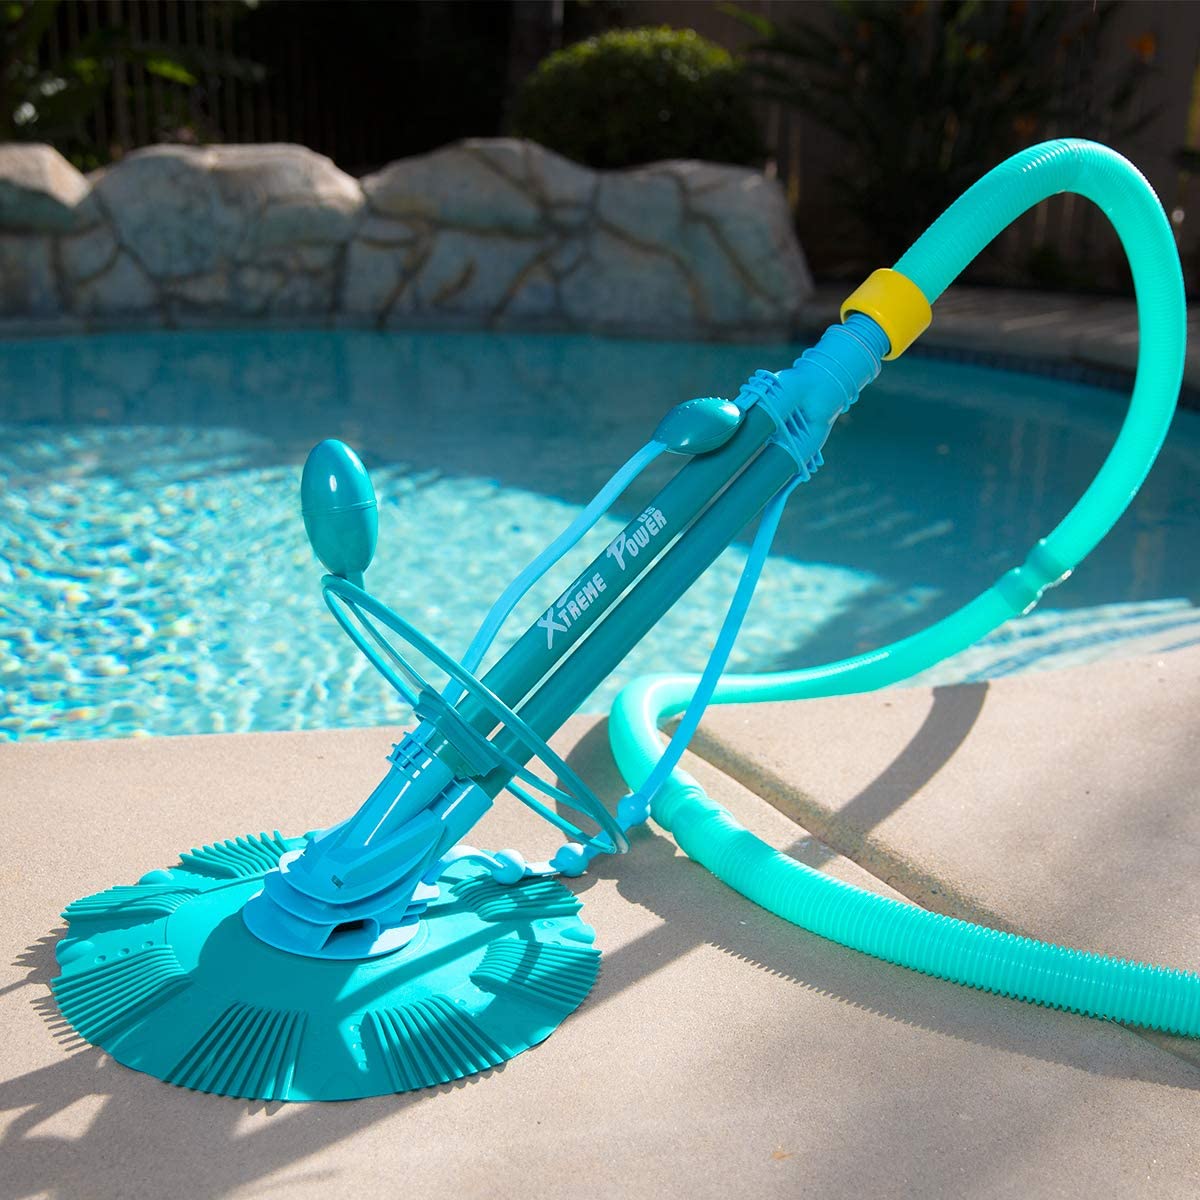 Best Suction Pool Cleaners for Leaves 2020